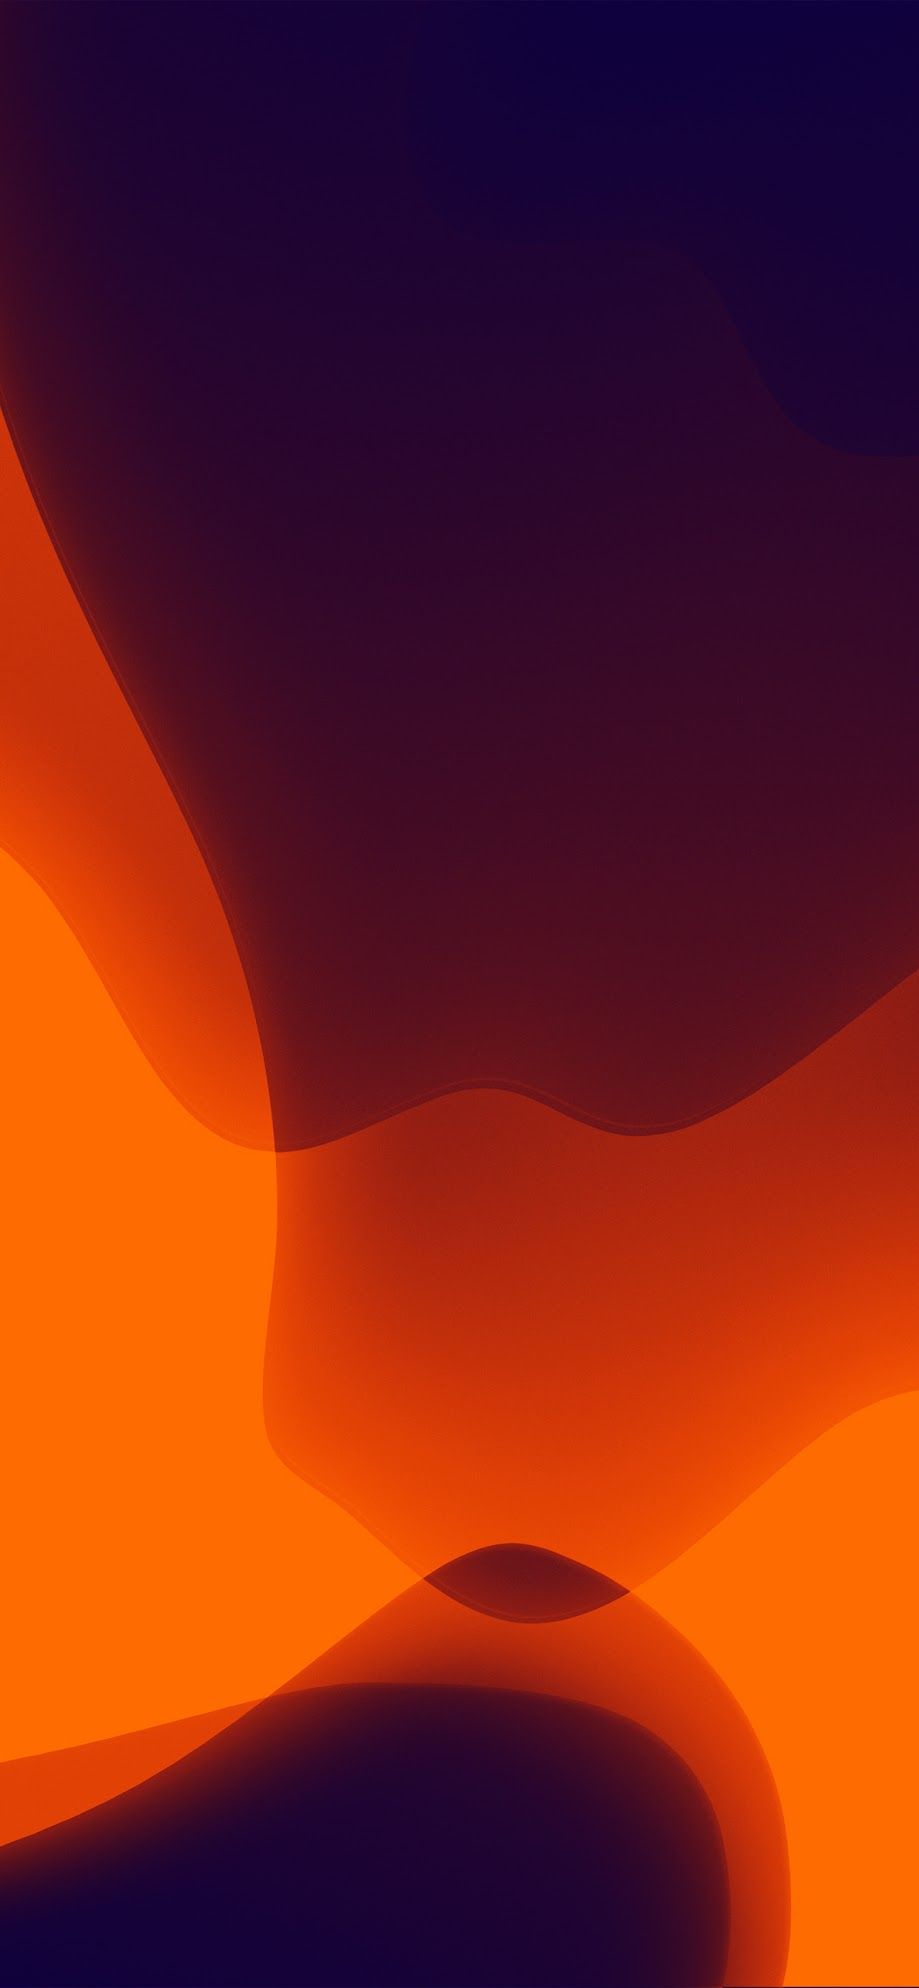 iOS 13 wallpaper in various colors for iPhone and iPad